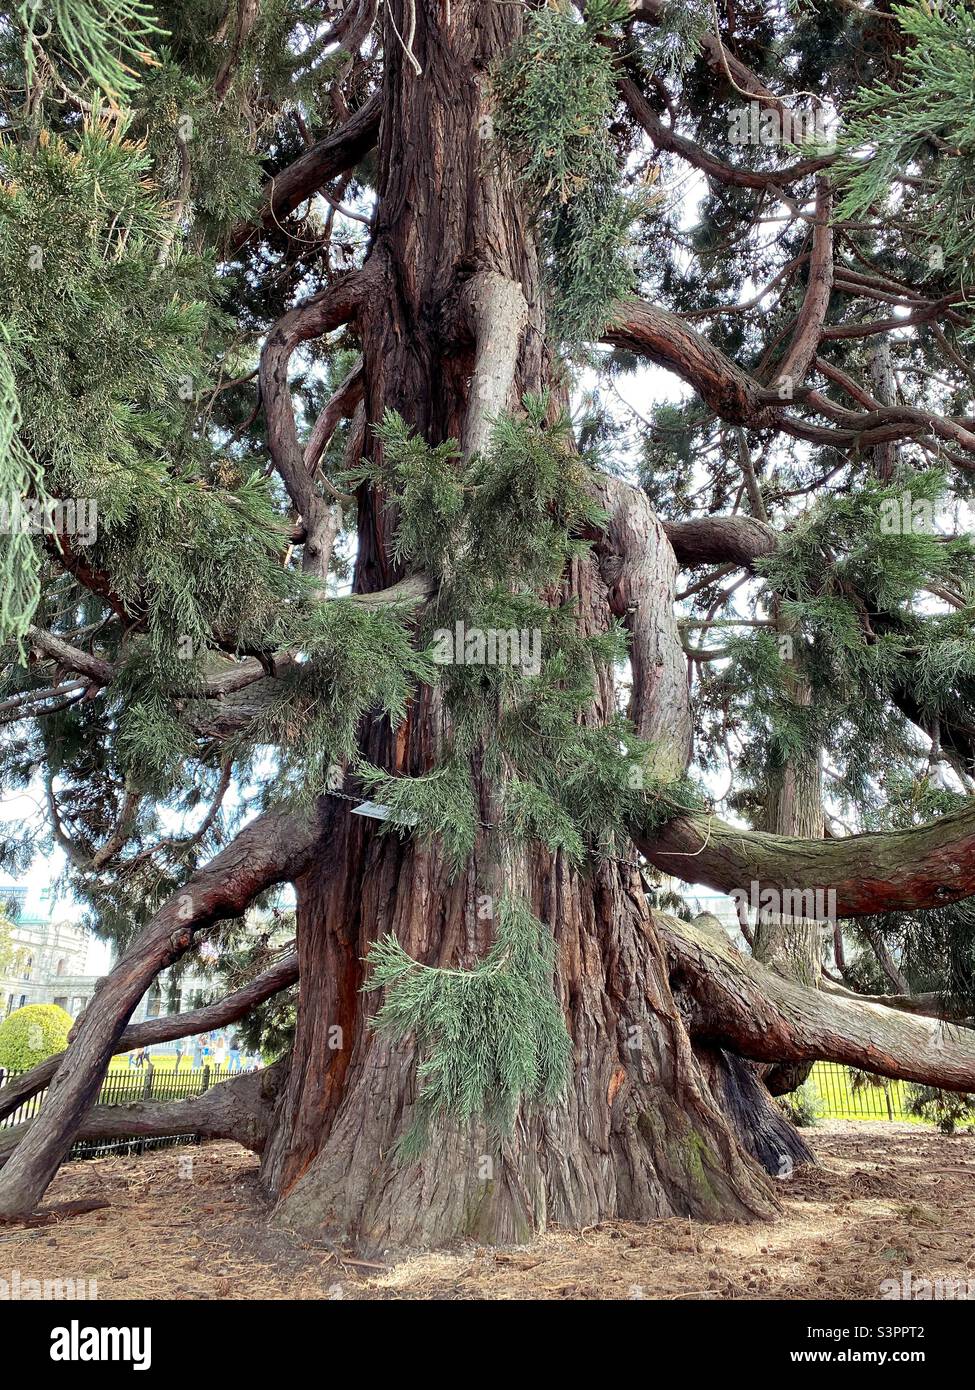 A sequoia tree that is over 100 years old, in front of the British Columbia parliament buildings in Victoria, BC. Stock Photo